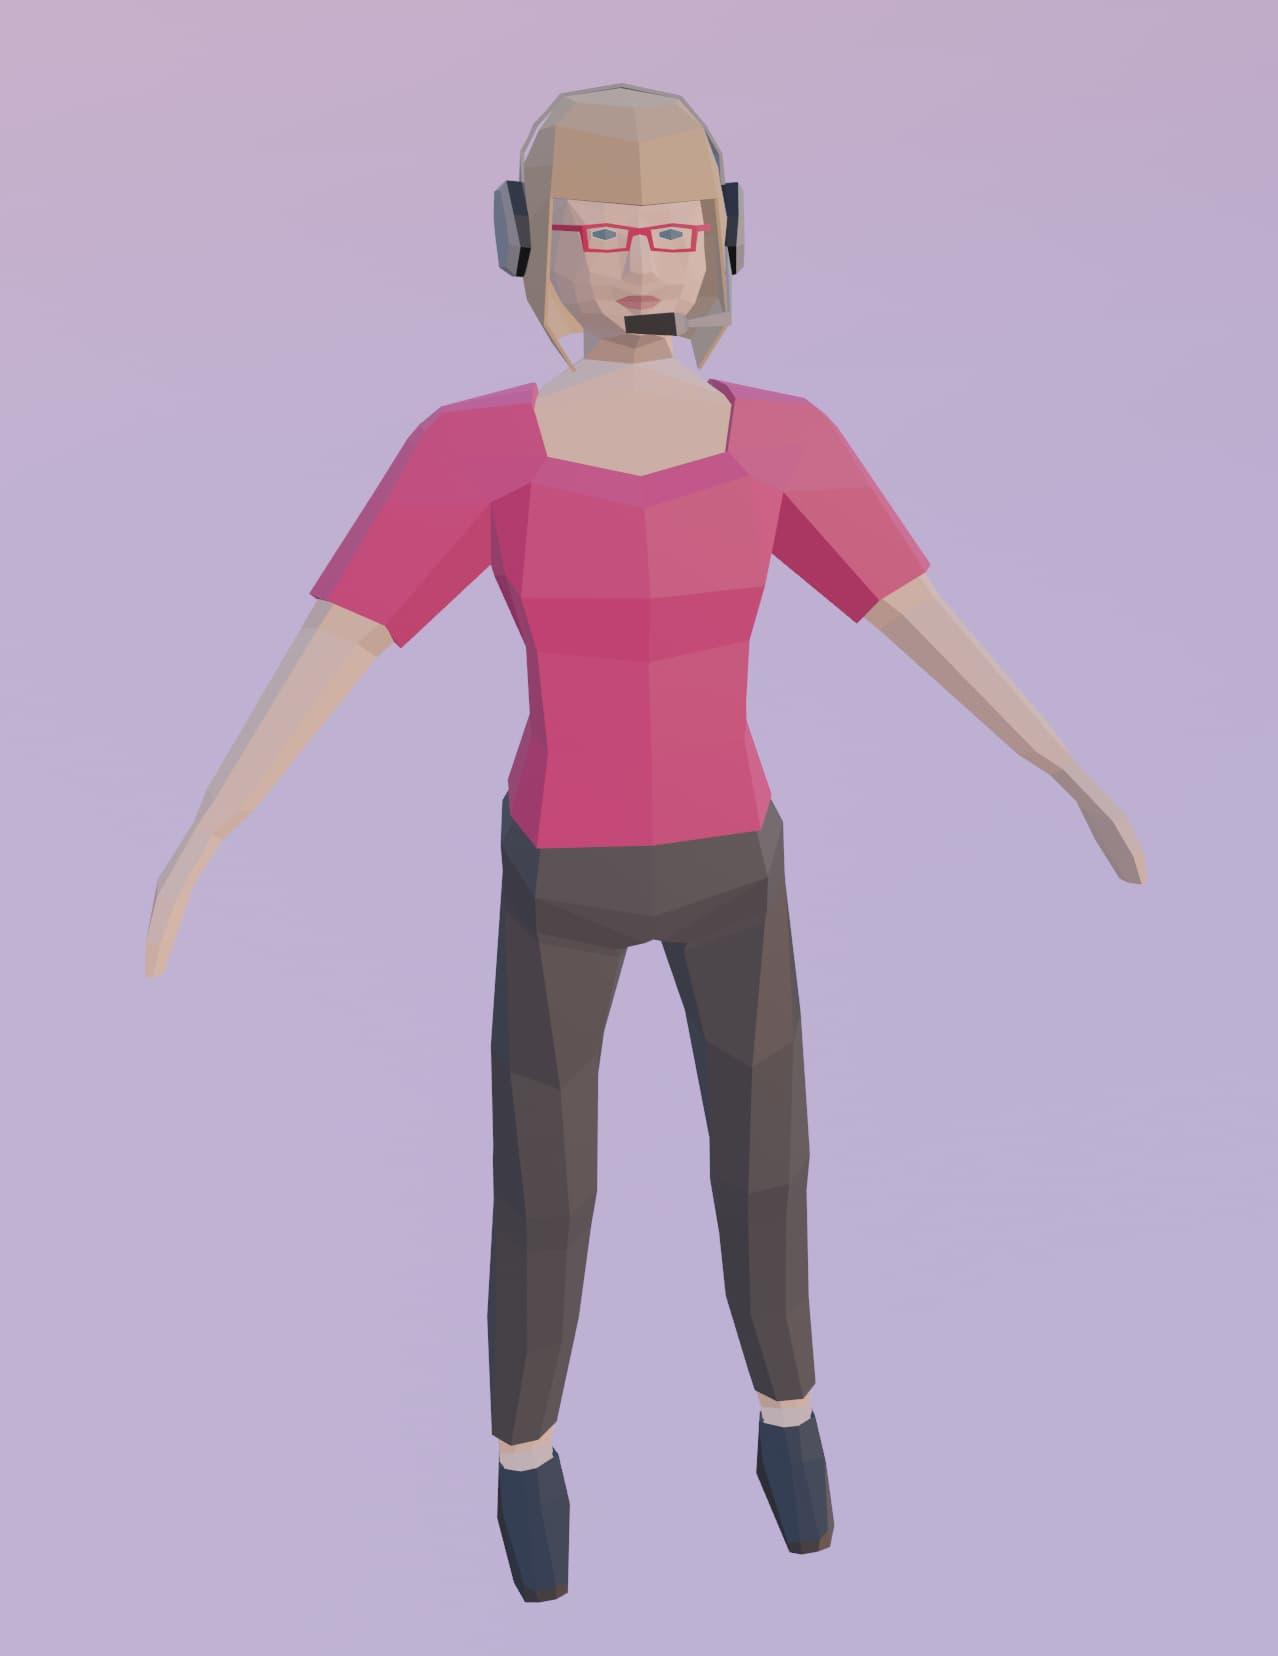 A low-poly model of a light-skinned woman with blonde hair, wearing a headset, a pink shirt, black leggings, and dress shoes